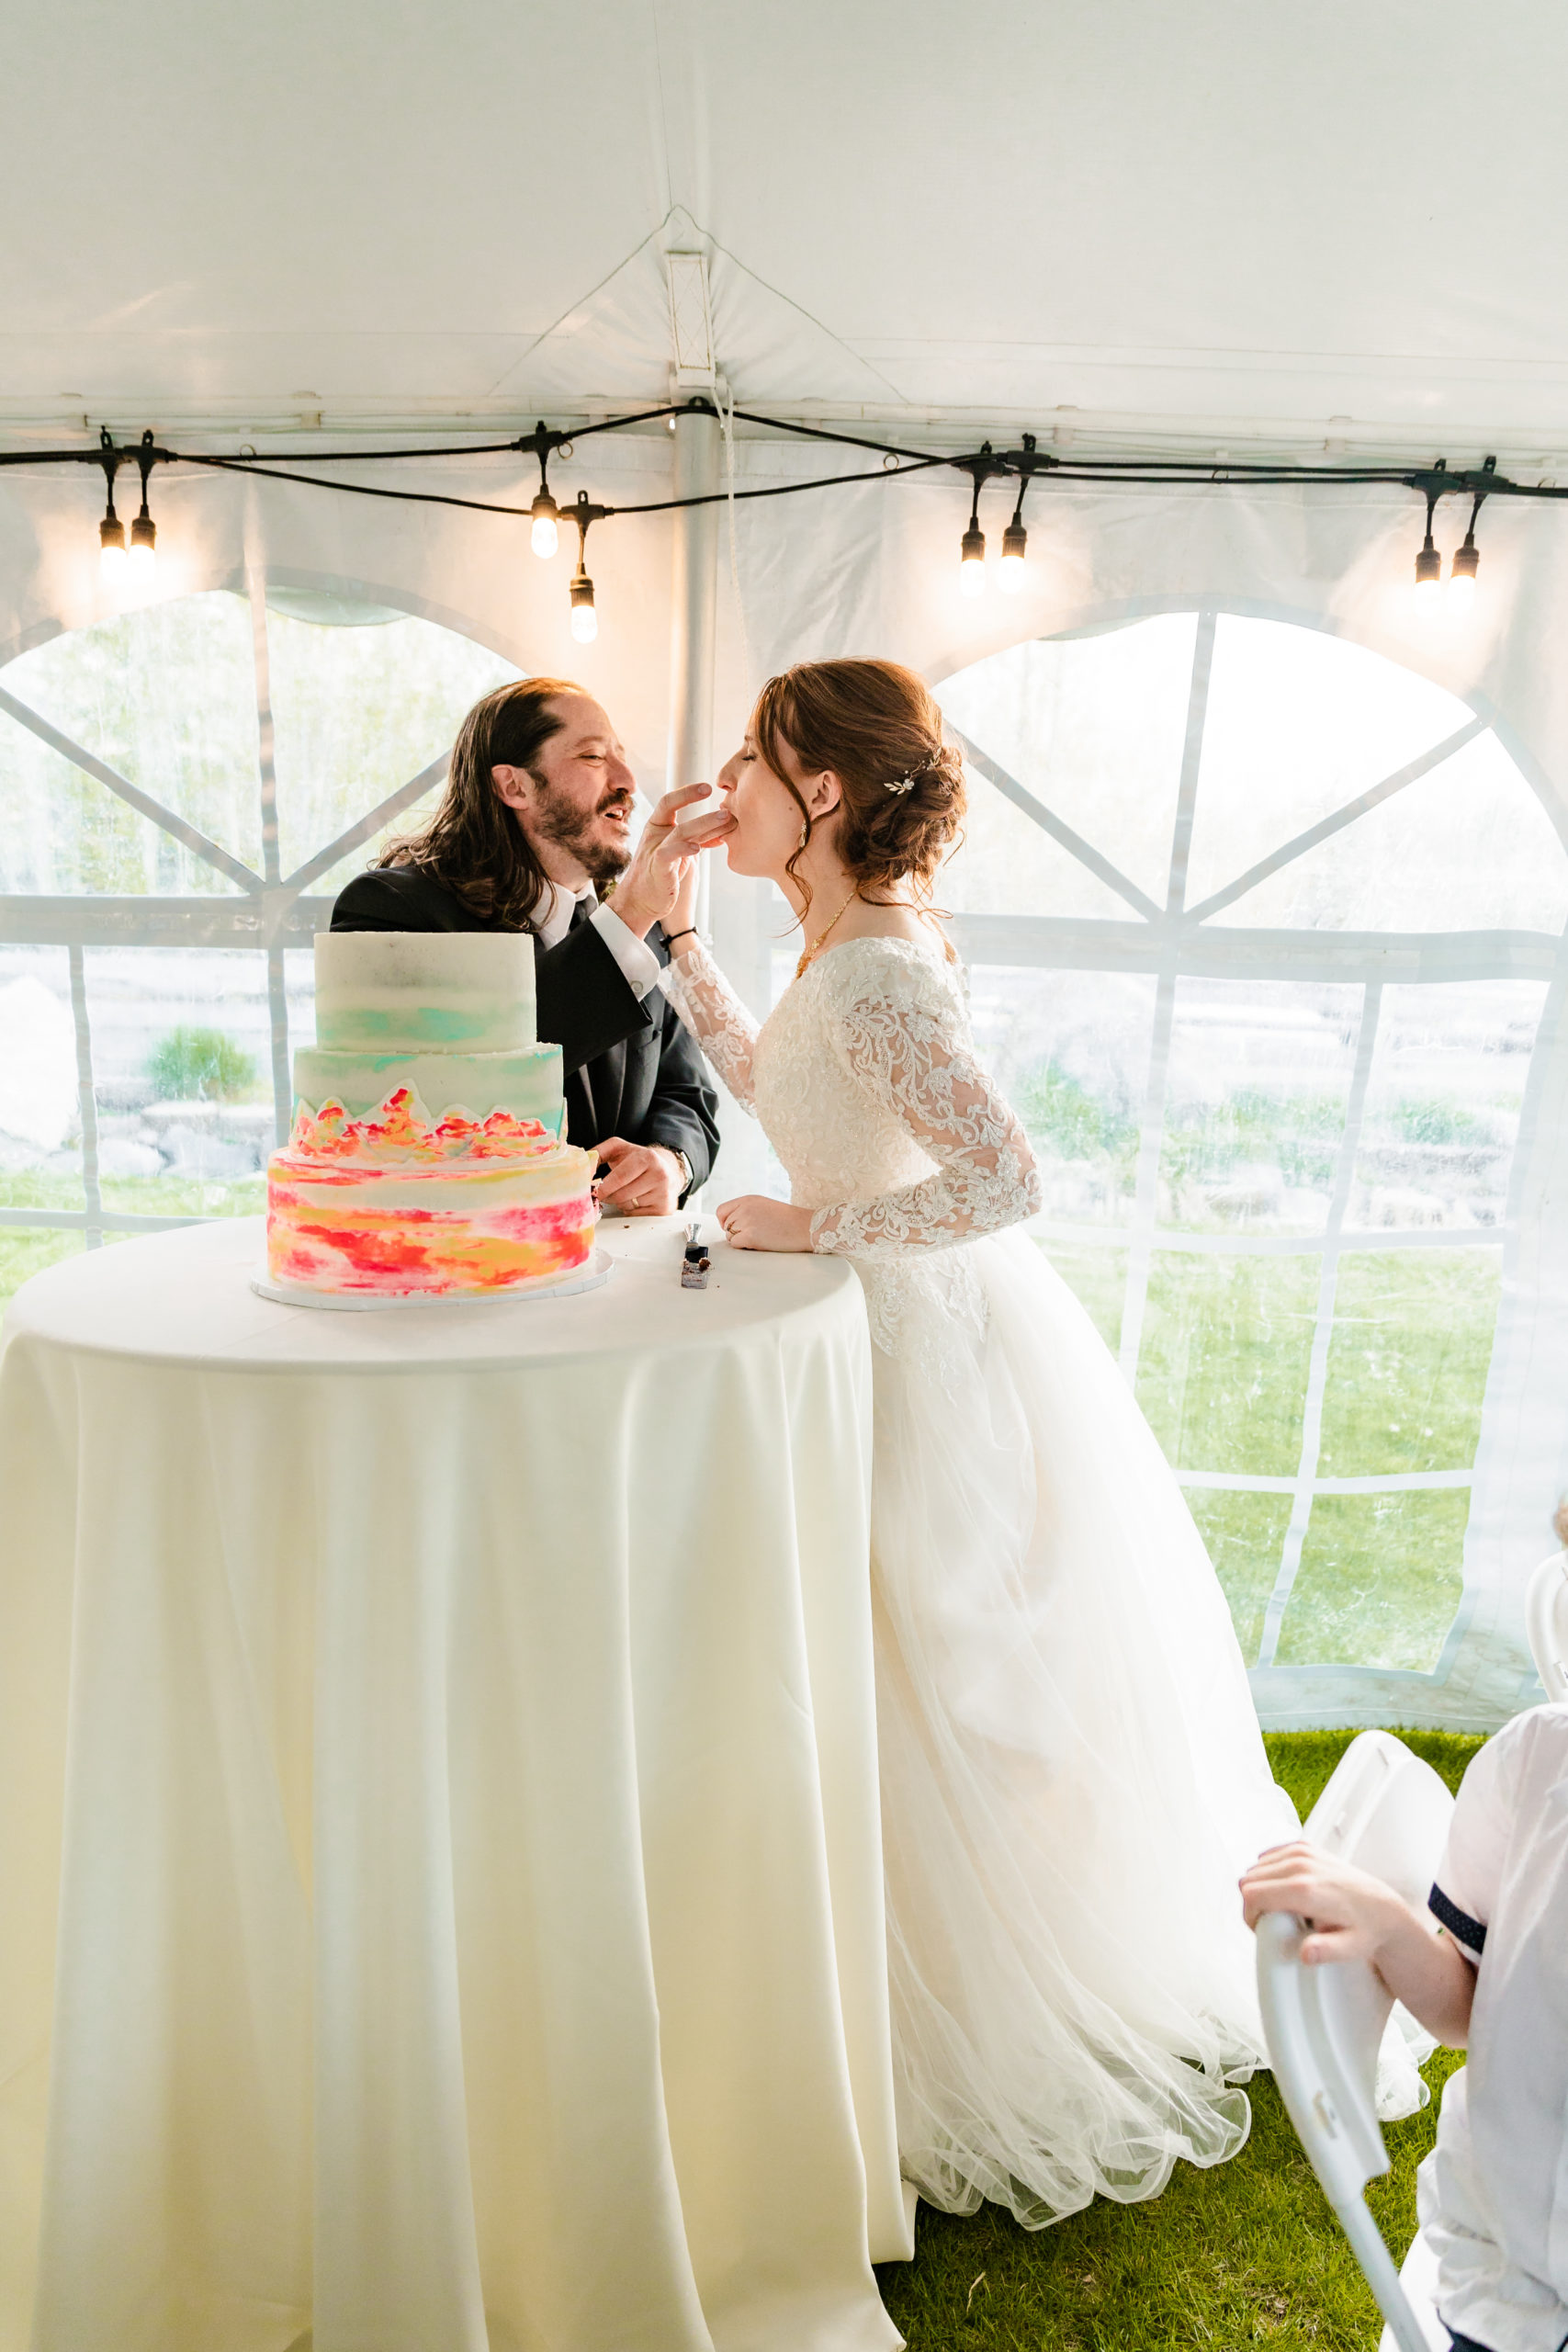 bride and groom cut the cake at their Idaho Falls wedding in a tent